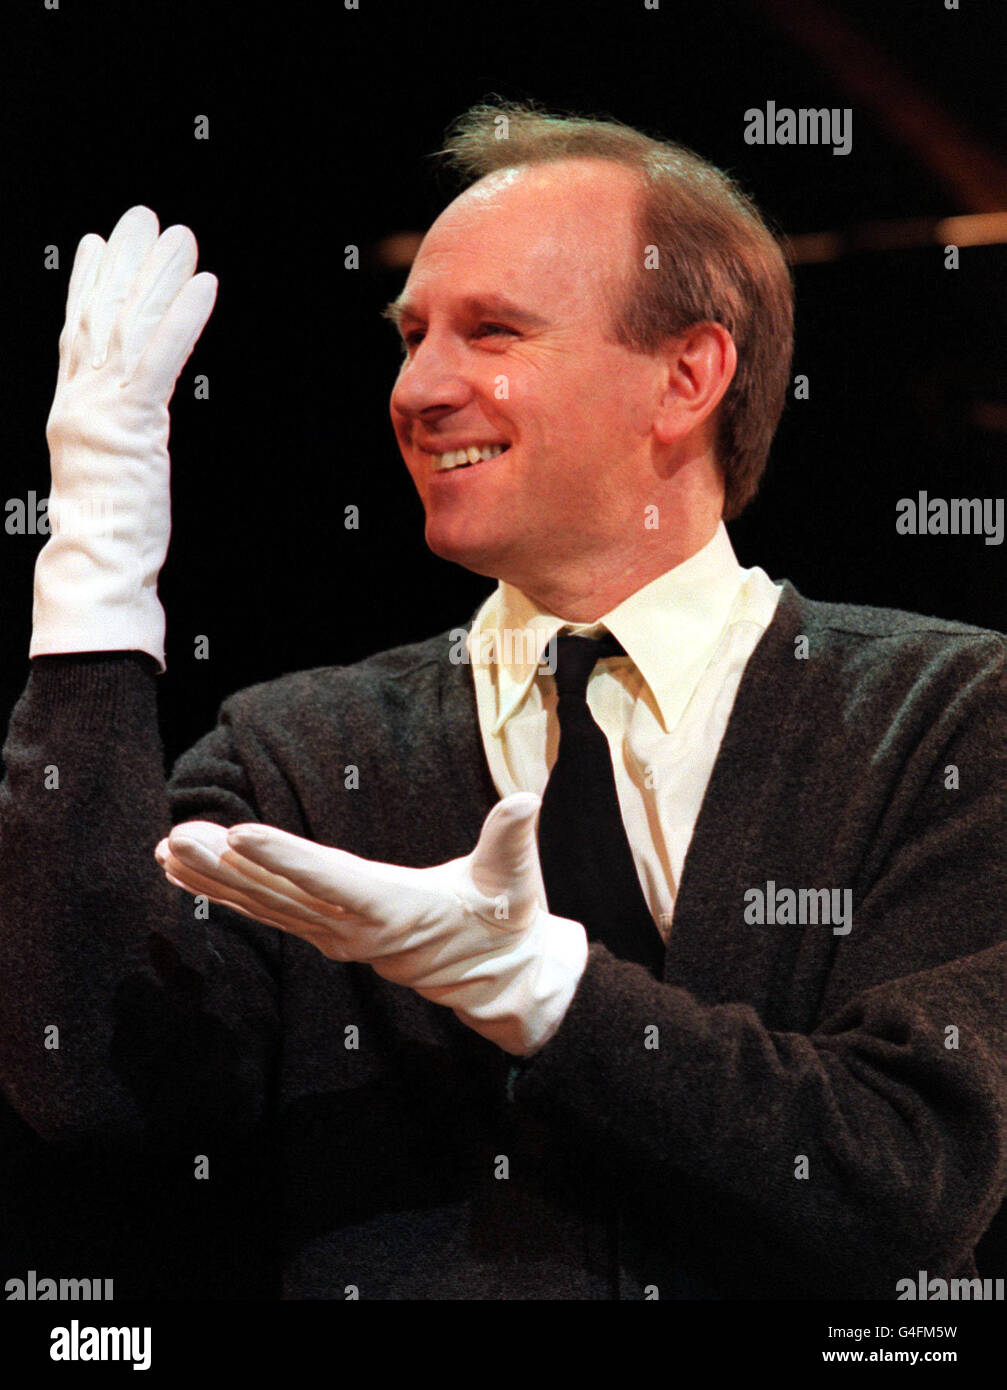 Actor Peter Davison, as 'Amos Hart', during a photocall for the hit West End musical 'Chicago'. Davison is one of three new cast members who joined the show in November. * 1/12/98 of actor Peter Davison pictured appearing in the hit West End musical Chicago. The former Dr Who star wrestled an armed thief to the ground after he stole a video camera containing film of the birth of his son it emerged Wednesday August 8, 2001. The 50-year-old actor gave chase to the youth after his car was broken into and the camera snatched near his home in north-west London. After the chase the actor, who also Stock Photo